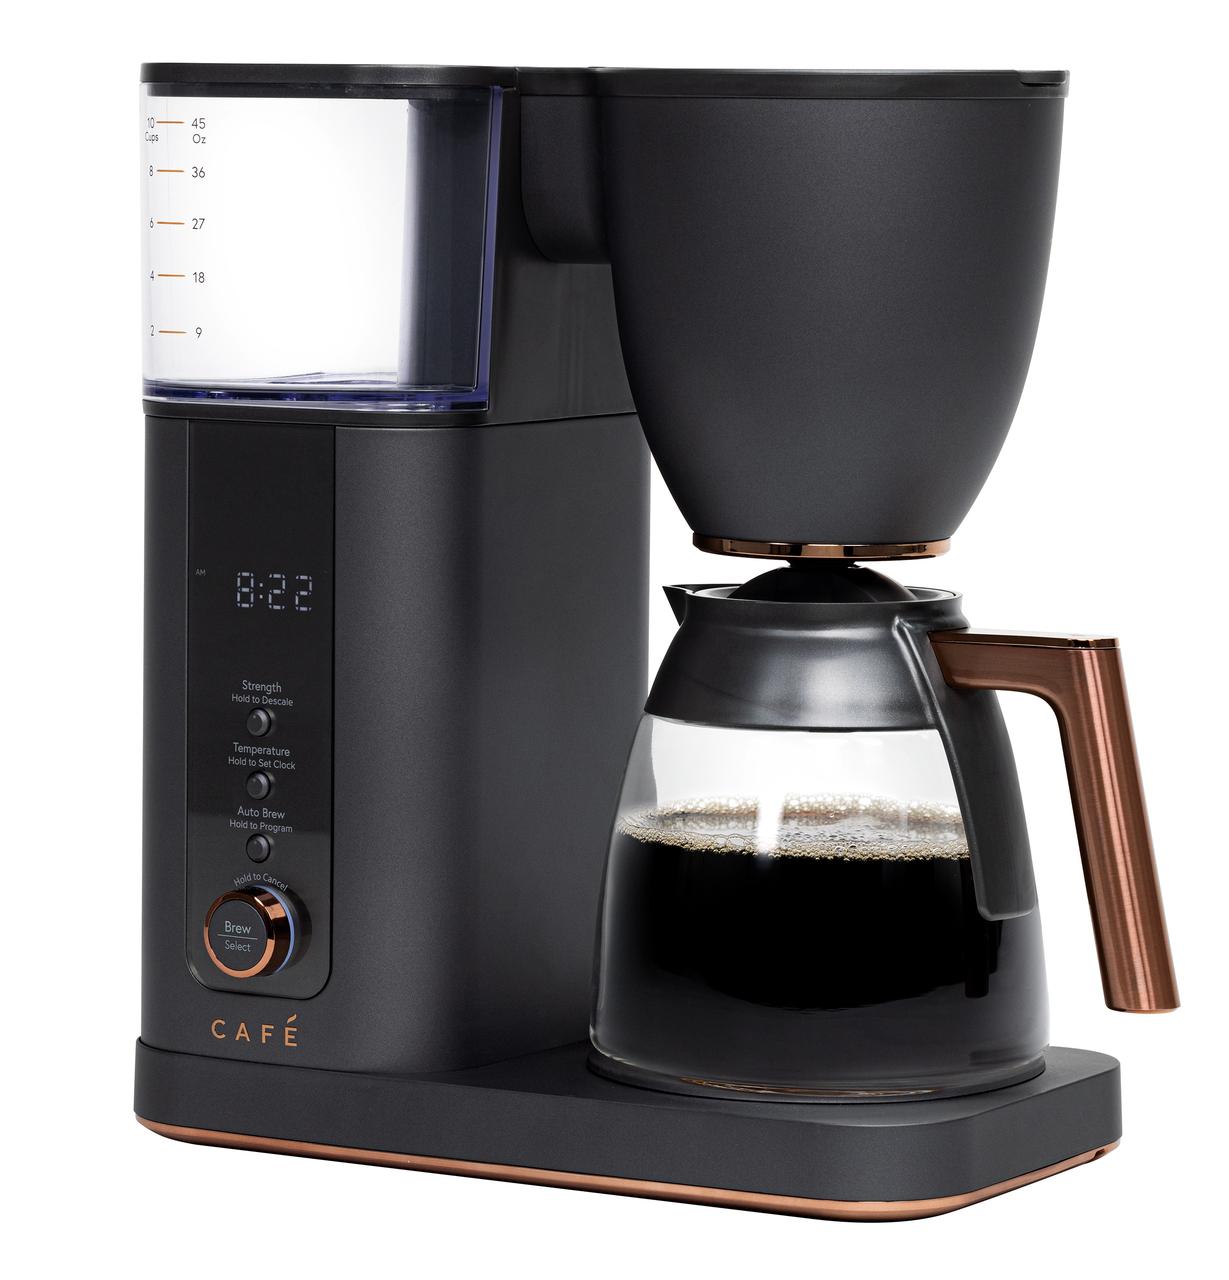 Cafe Caf(eback)™ Specialty Drip Coffee Maker with Glass Carafe